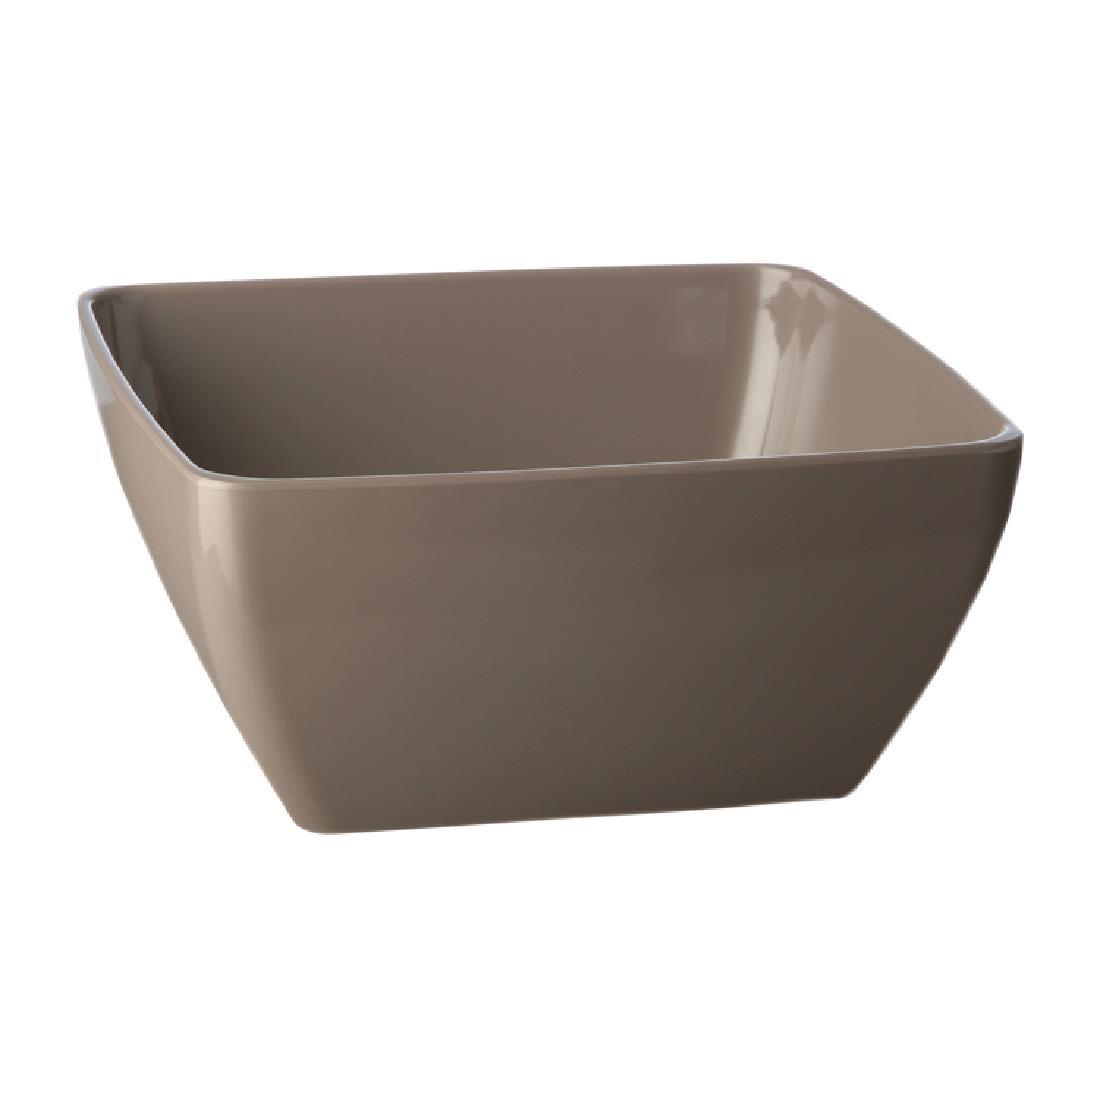 APS Pure Bowl Taupe 90mm - Each - DS012 - 1